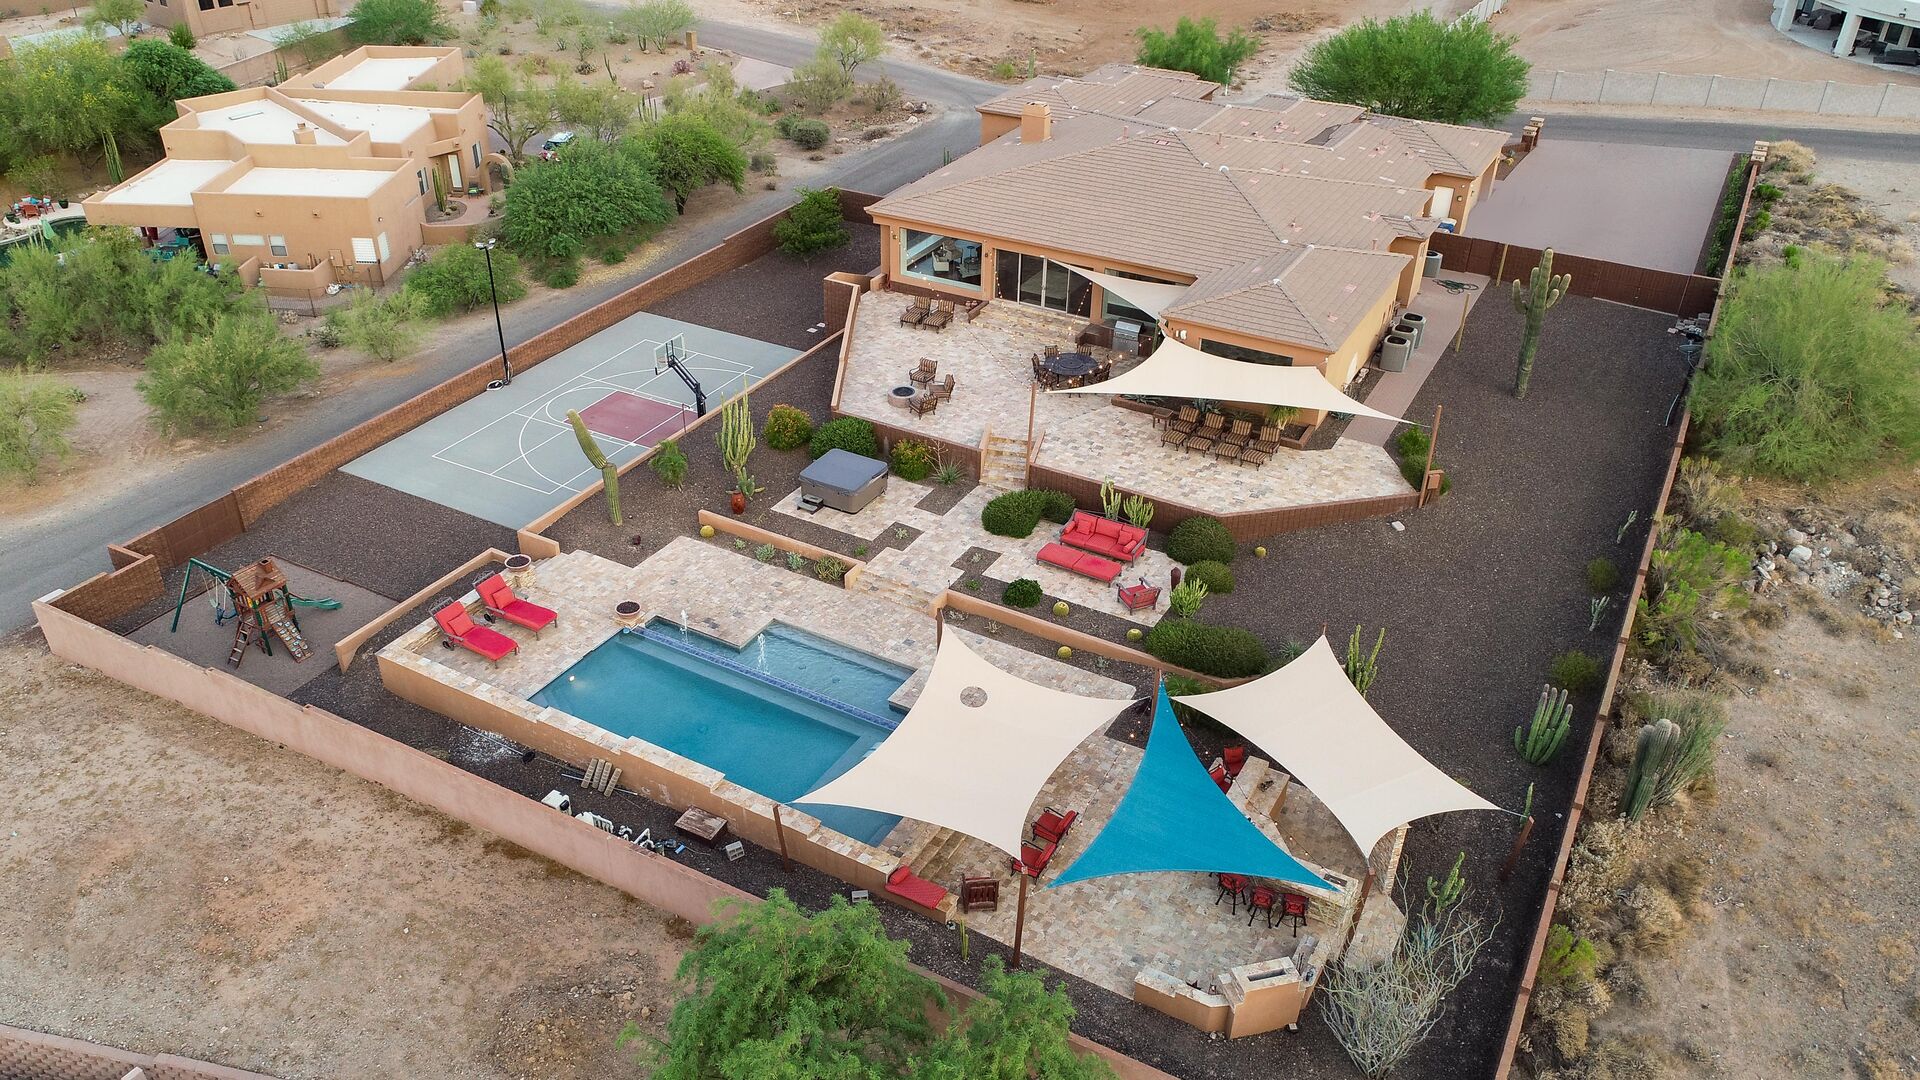 Aerial Photo of Desert Estate - The playground is no longer available.